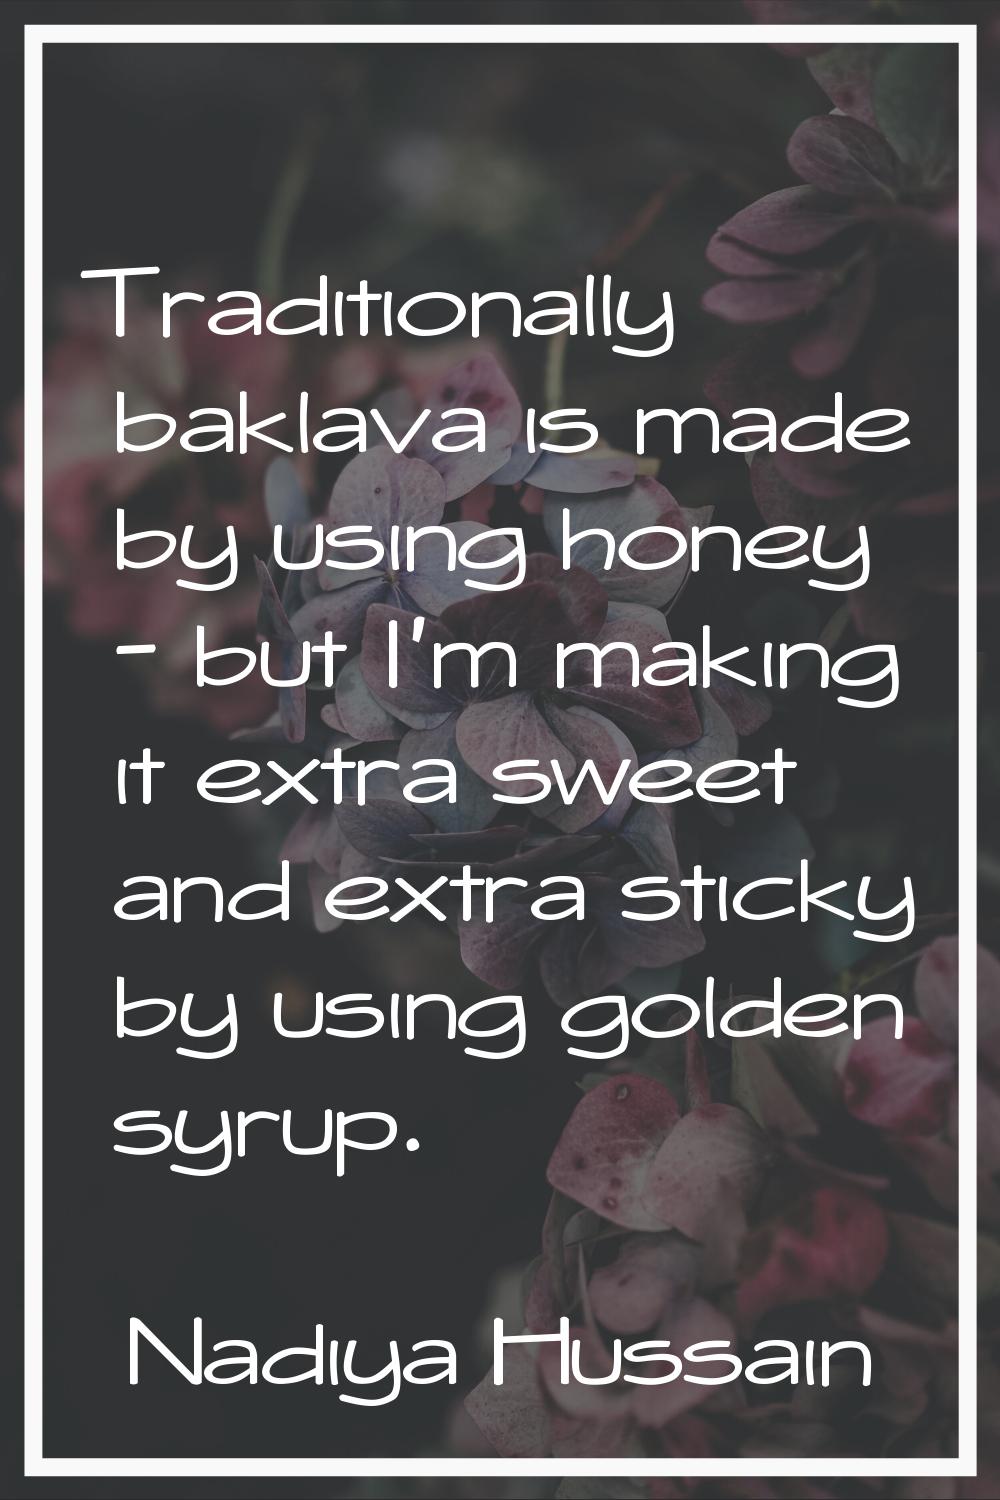 Traditionally baklava is made by using honey - but I'm making it extra sweet and extra sticky by us